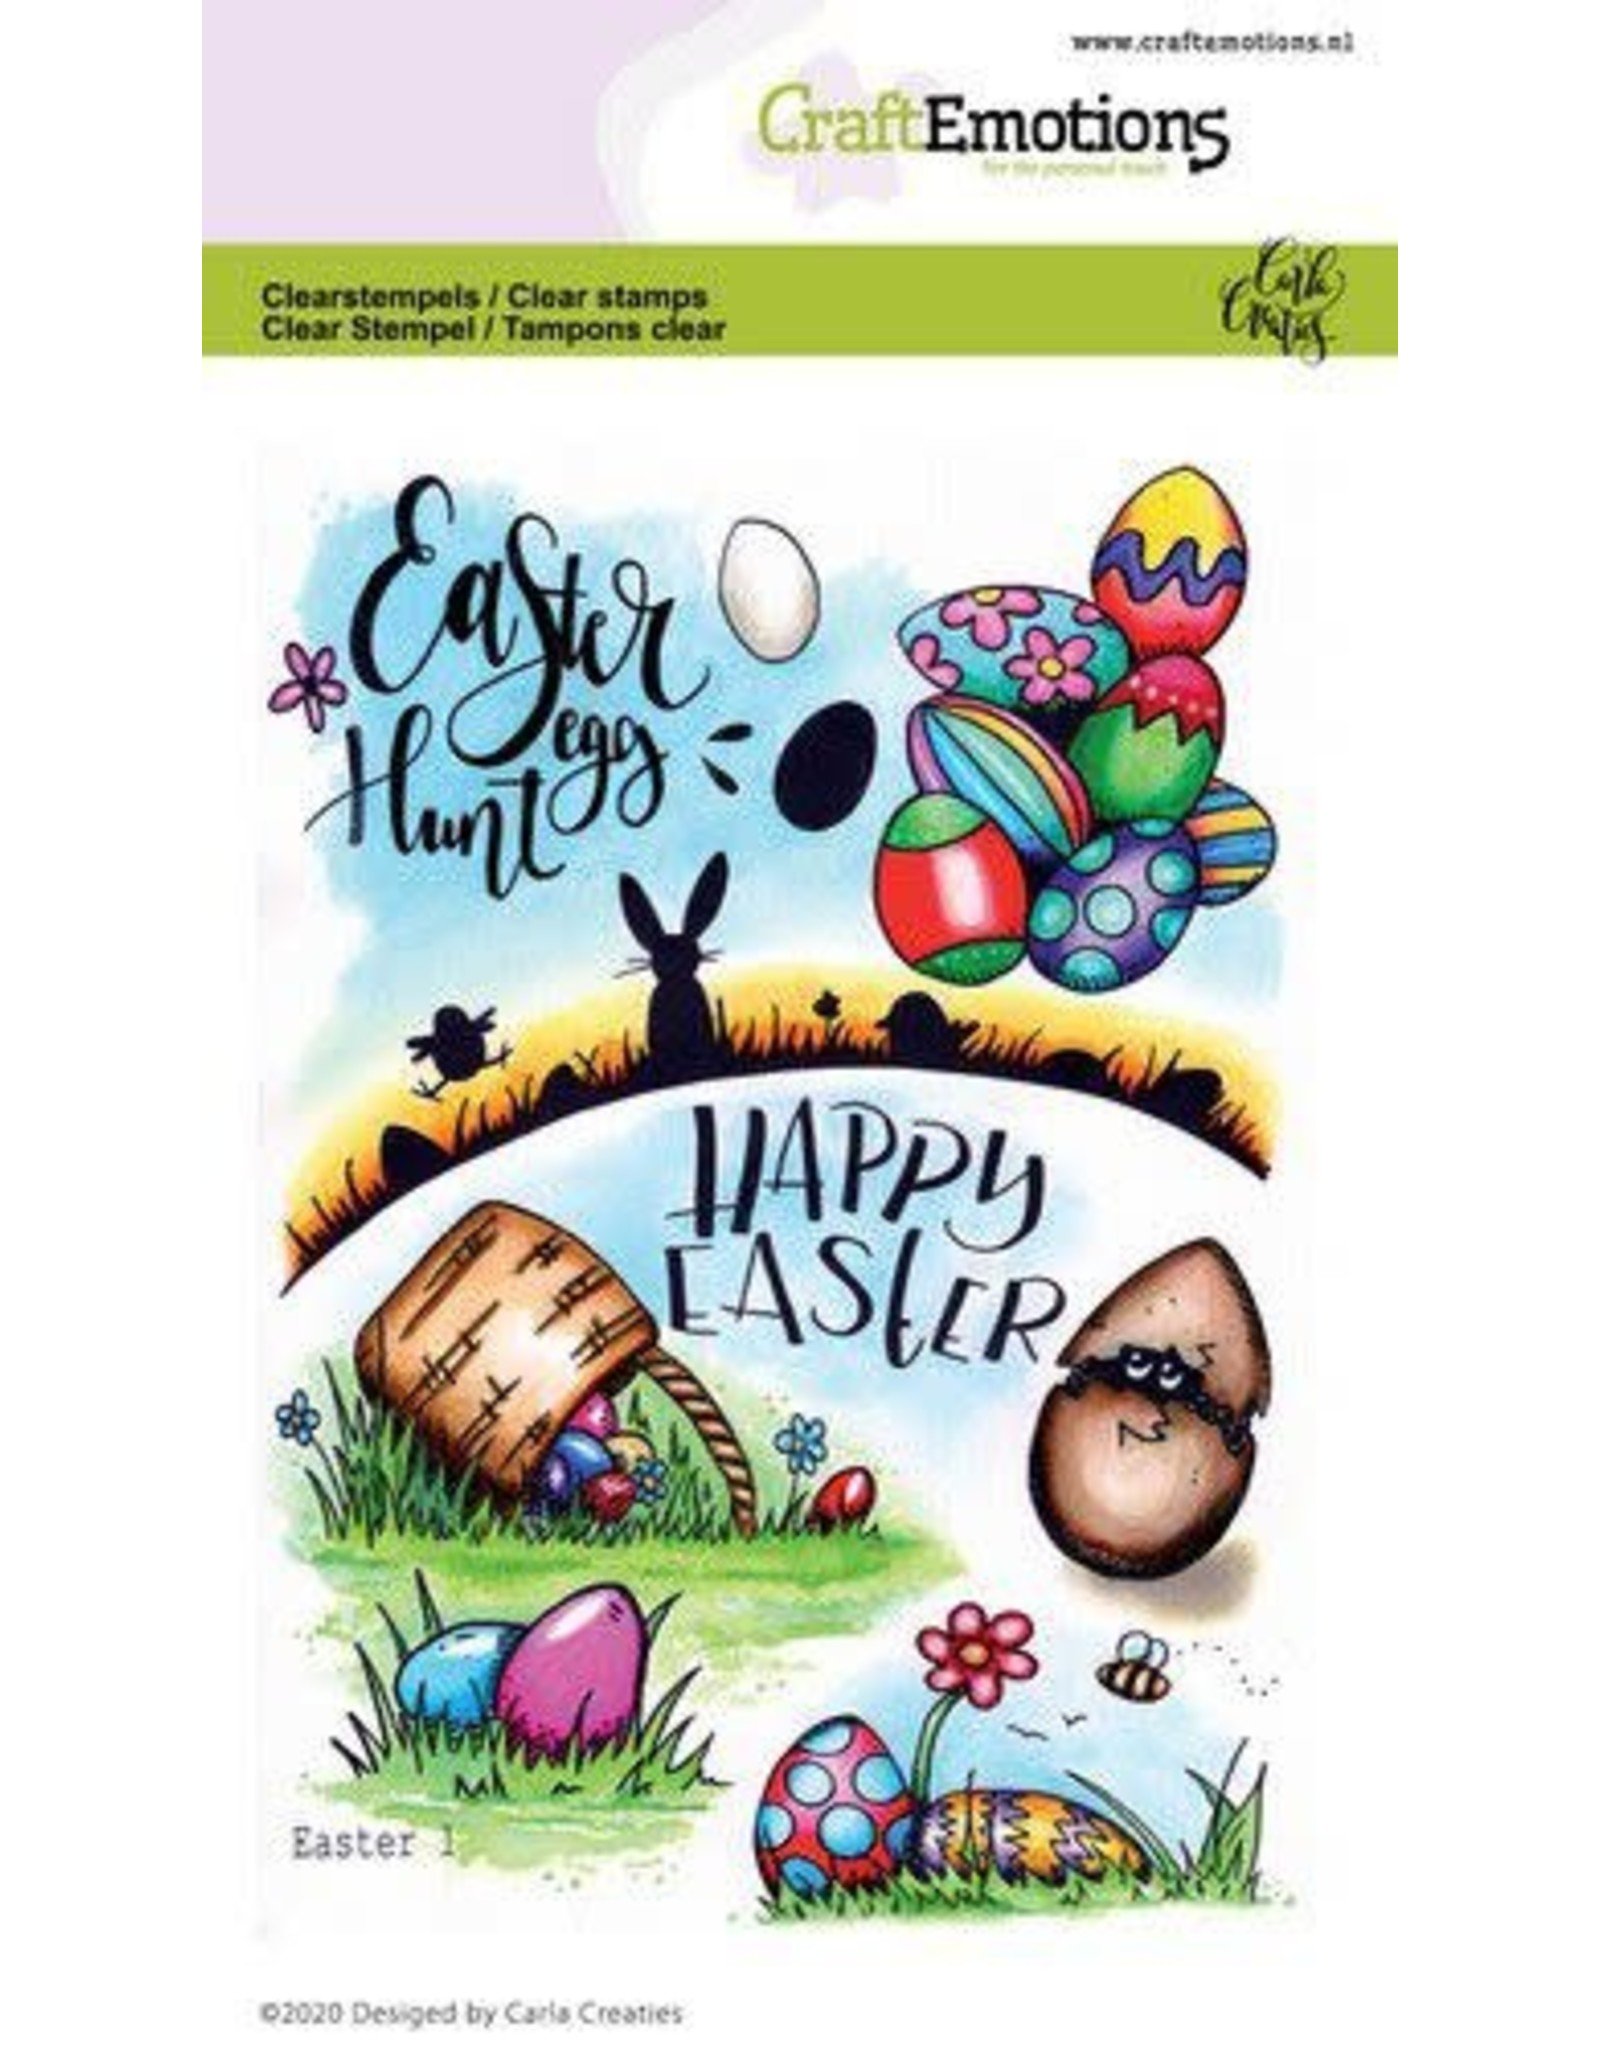 Craft Emotions CraftEmotions clearstamps A6 - Easter 1 Carla Creaties